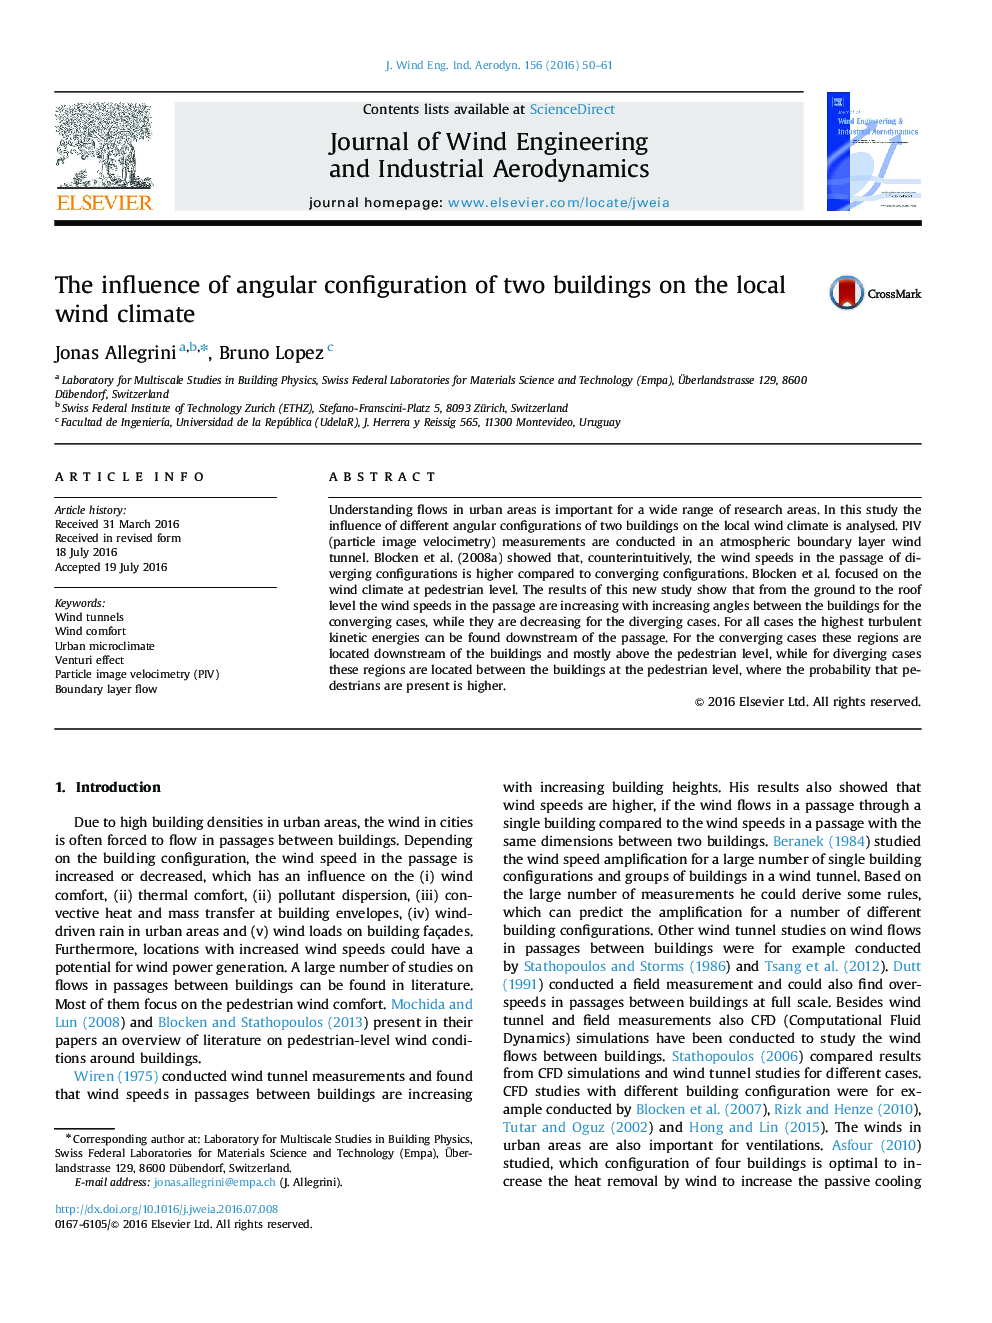 The influence of angular configuration of two buildings on the local wind climate